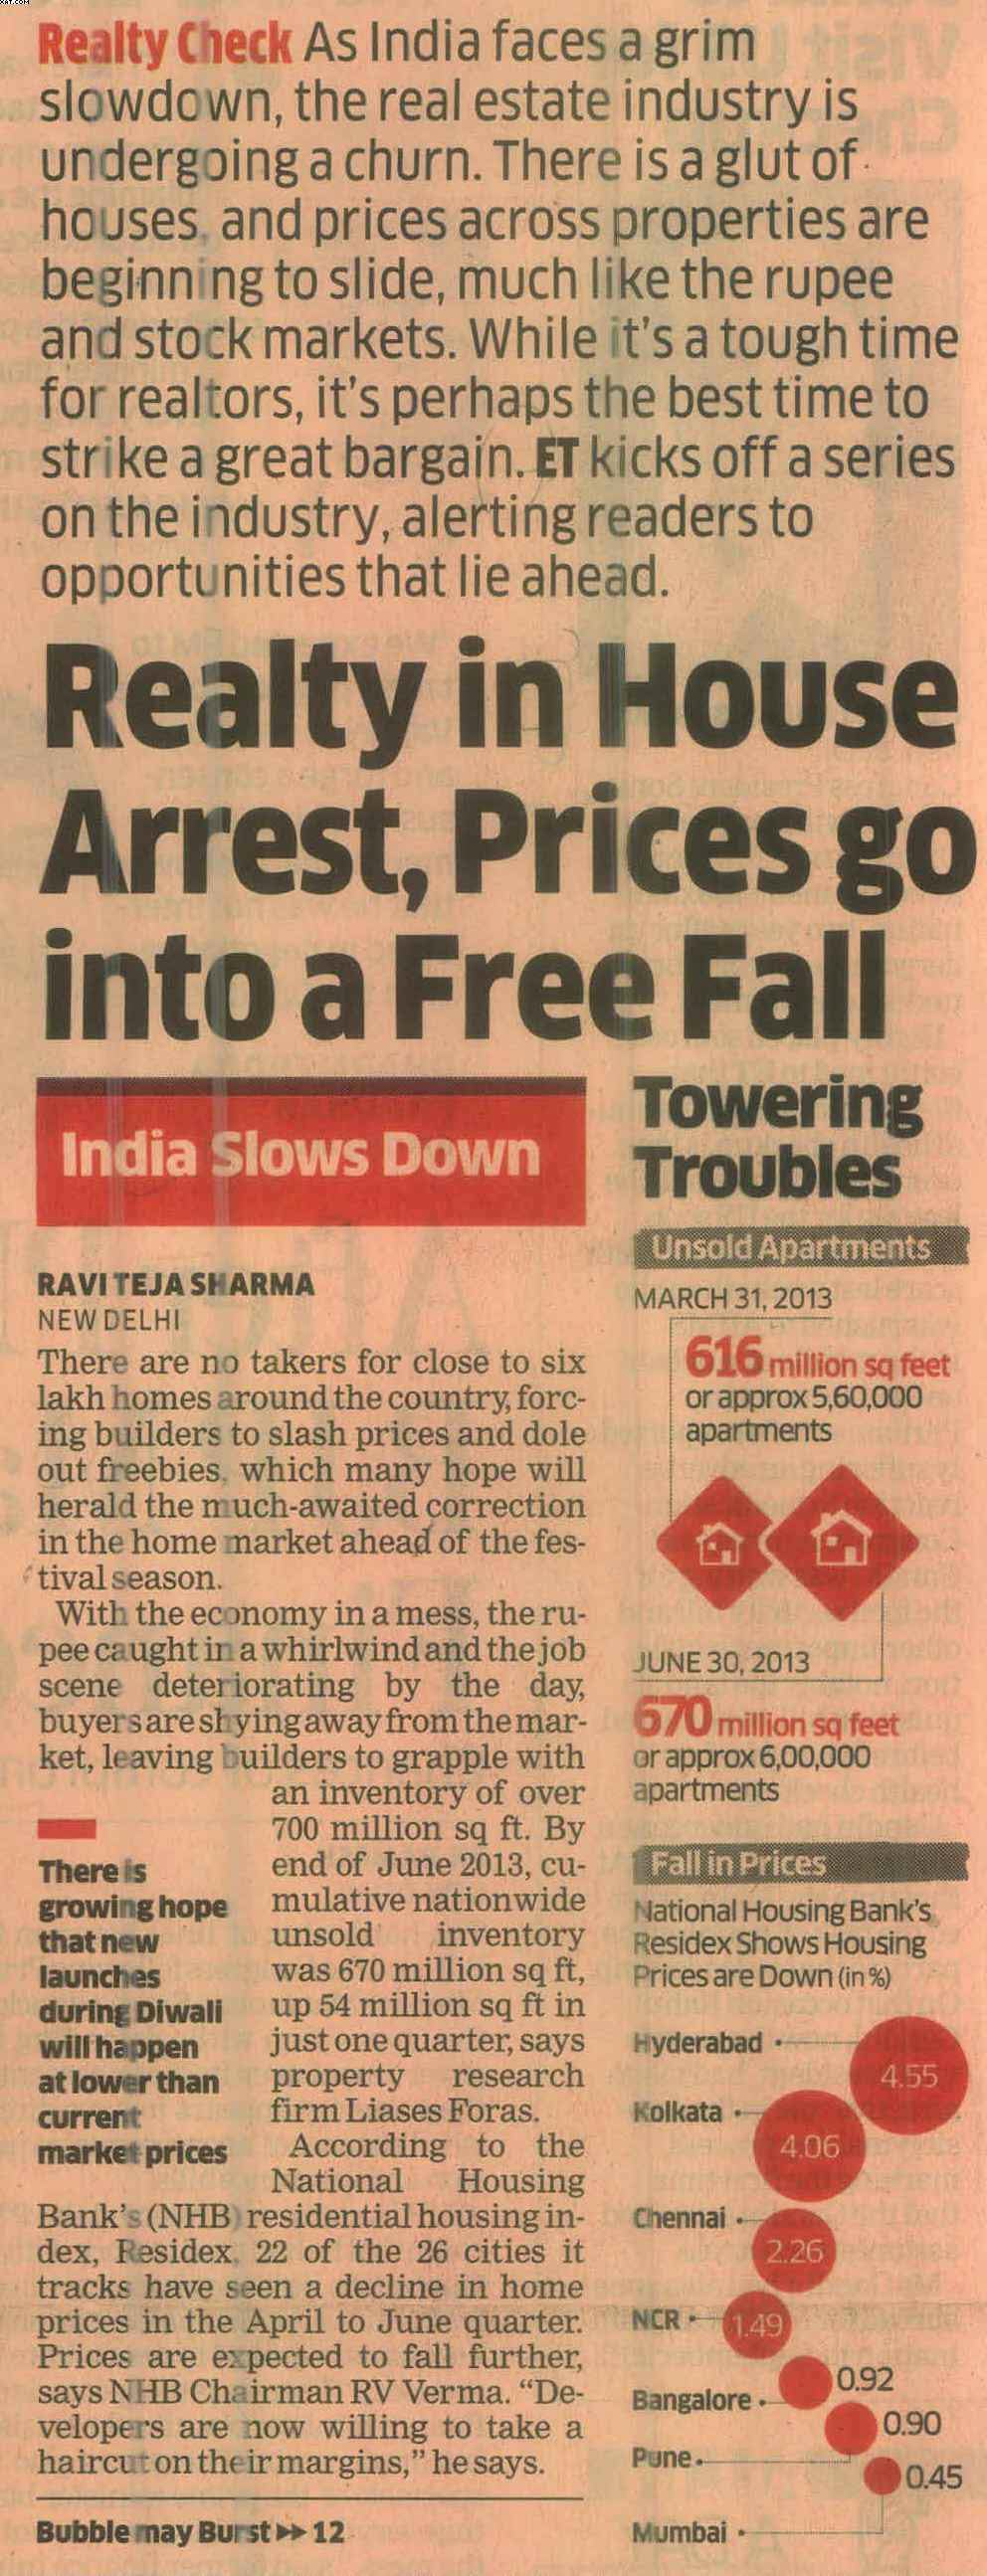 Realty in house arrest, prices go into a free fall